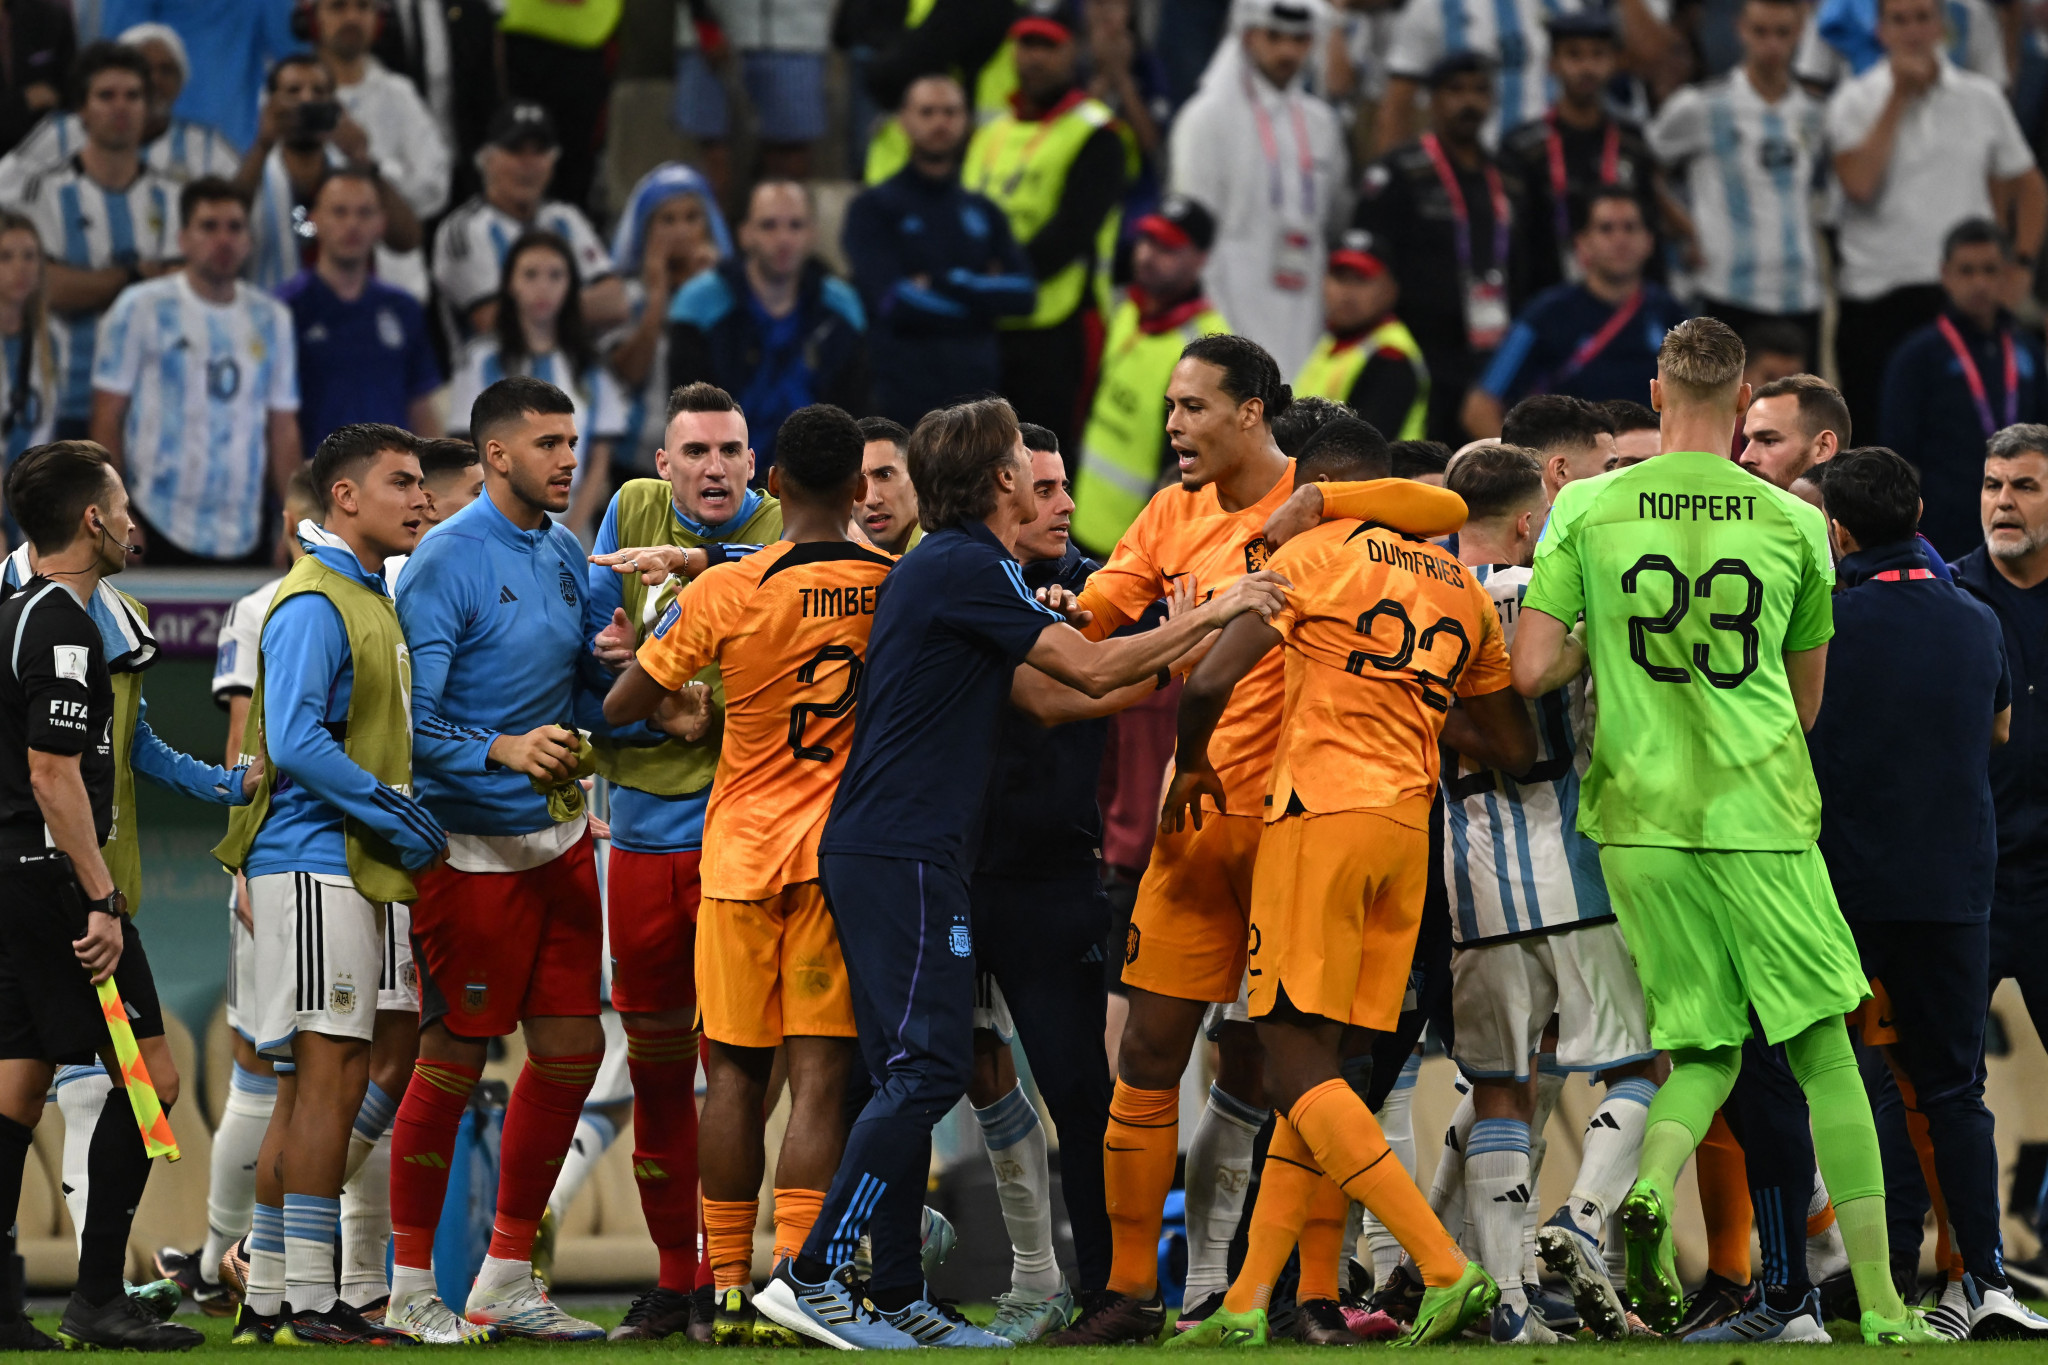 There were scuffles throughout and at the conclusion of the quarter-final between the Netherlands and Argentina ©Getty Images